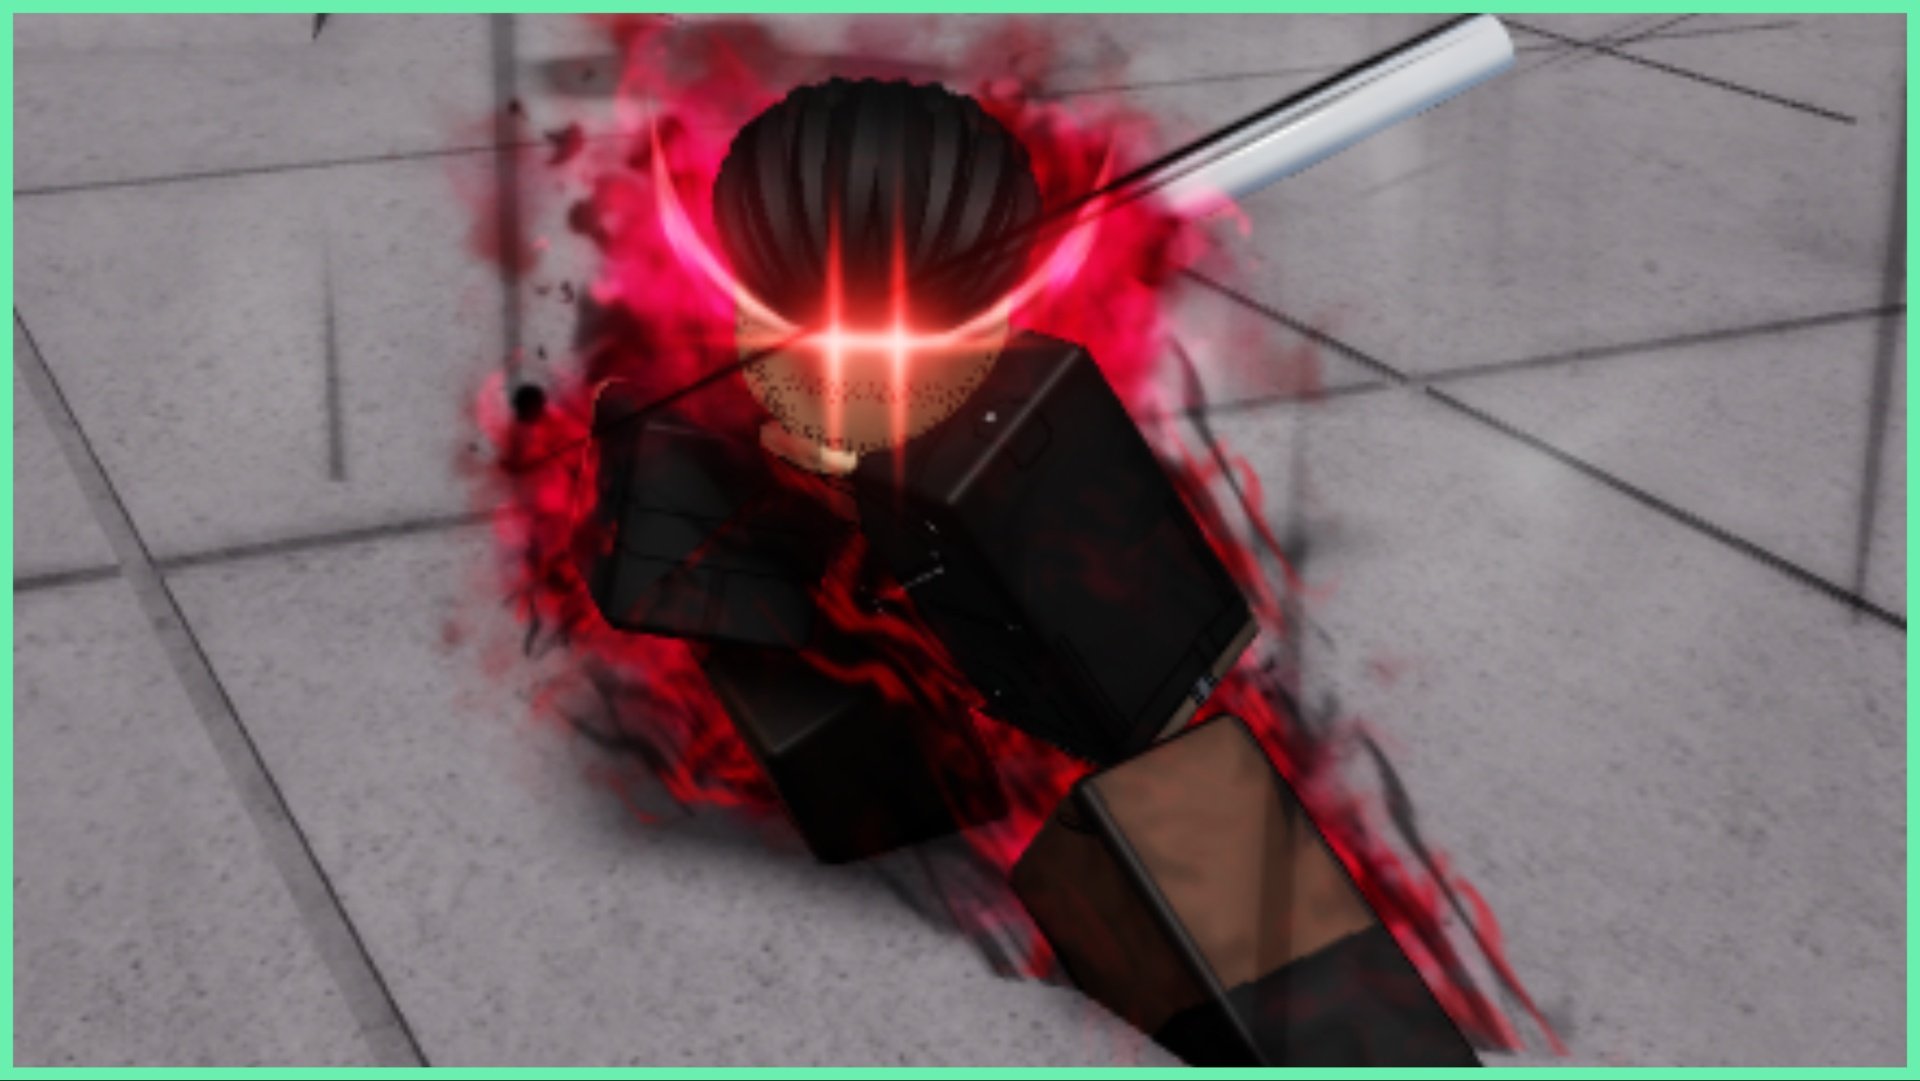 The image shows a character in a crouched power stance holding a bat behind them. They have a red aura and red shining eyes.